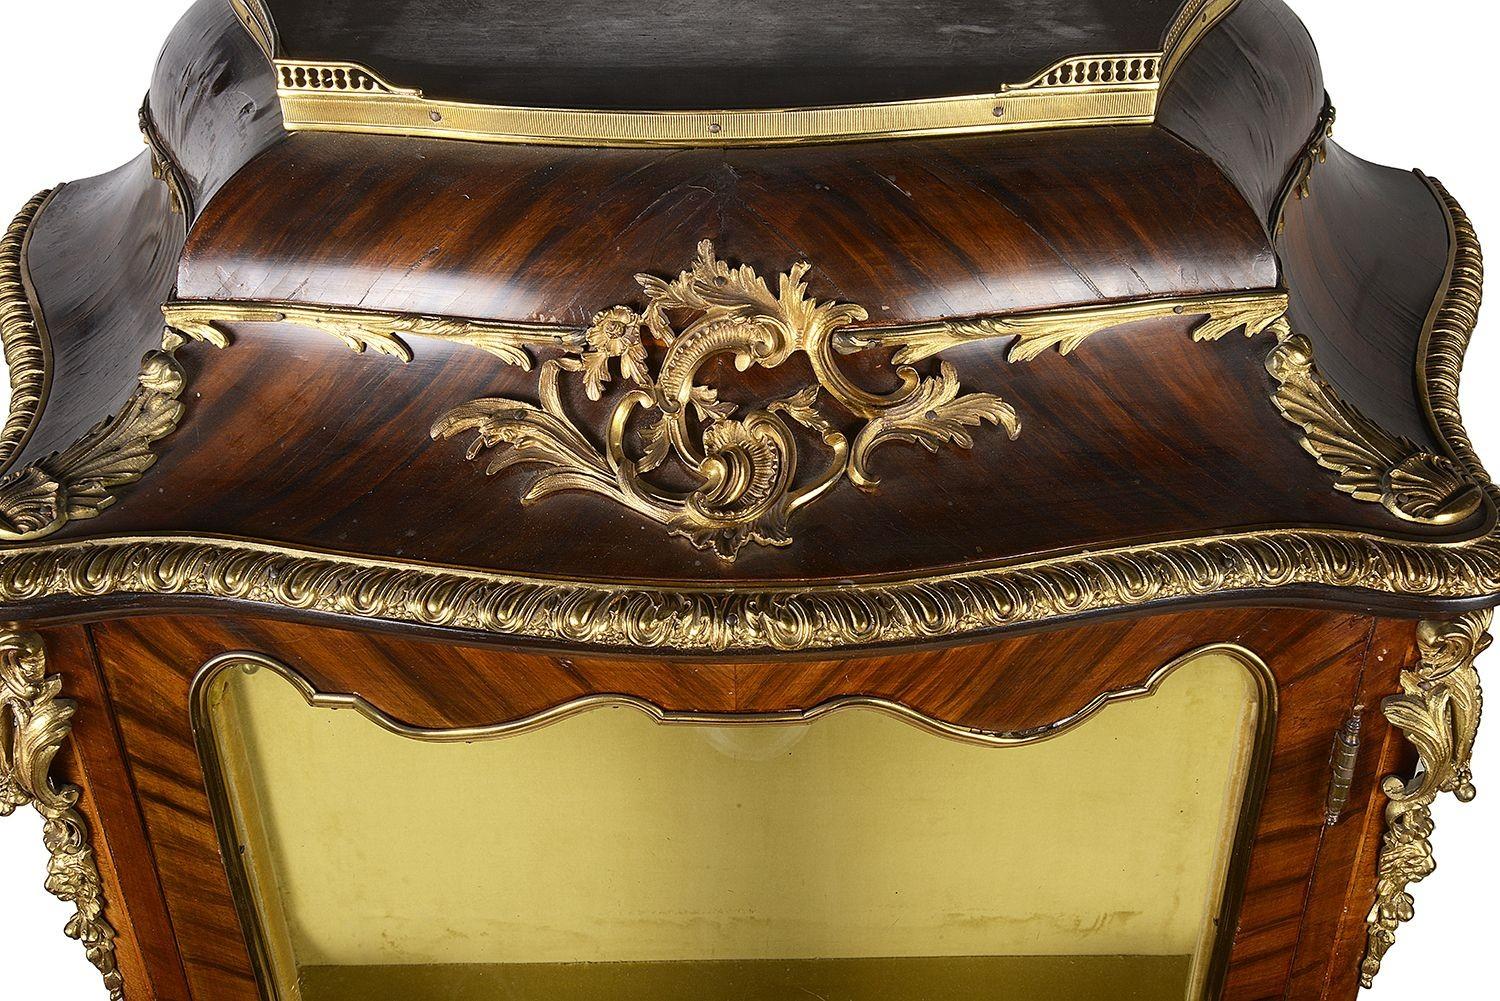 A pair of very good quality pair of late 19th century French Louis XVI style bombe vitrines, each with scrolling foliate and rams head gilded ormolu mounts, wonderful marquetry + parquetry floral inlaid panels, single doors opening to reveal a